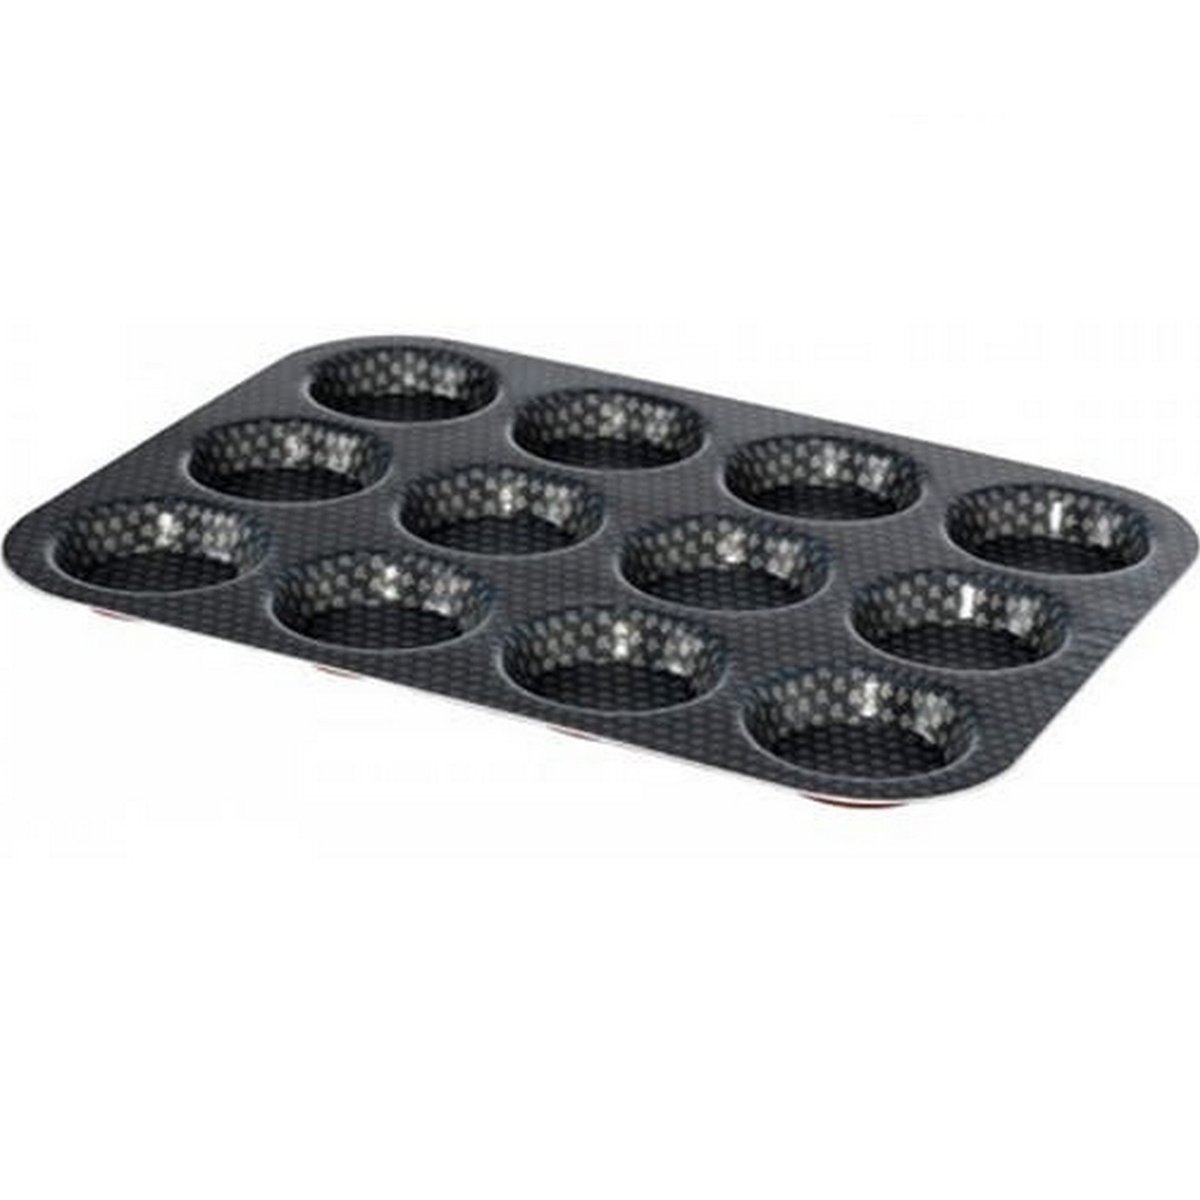 Tefal Patisserie Muffin Mould J0362812 30x23